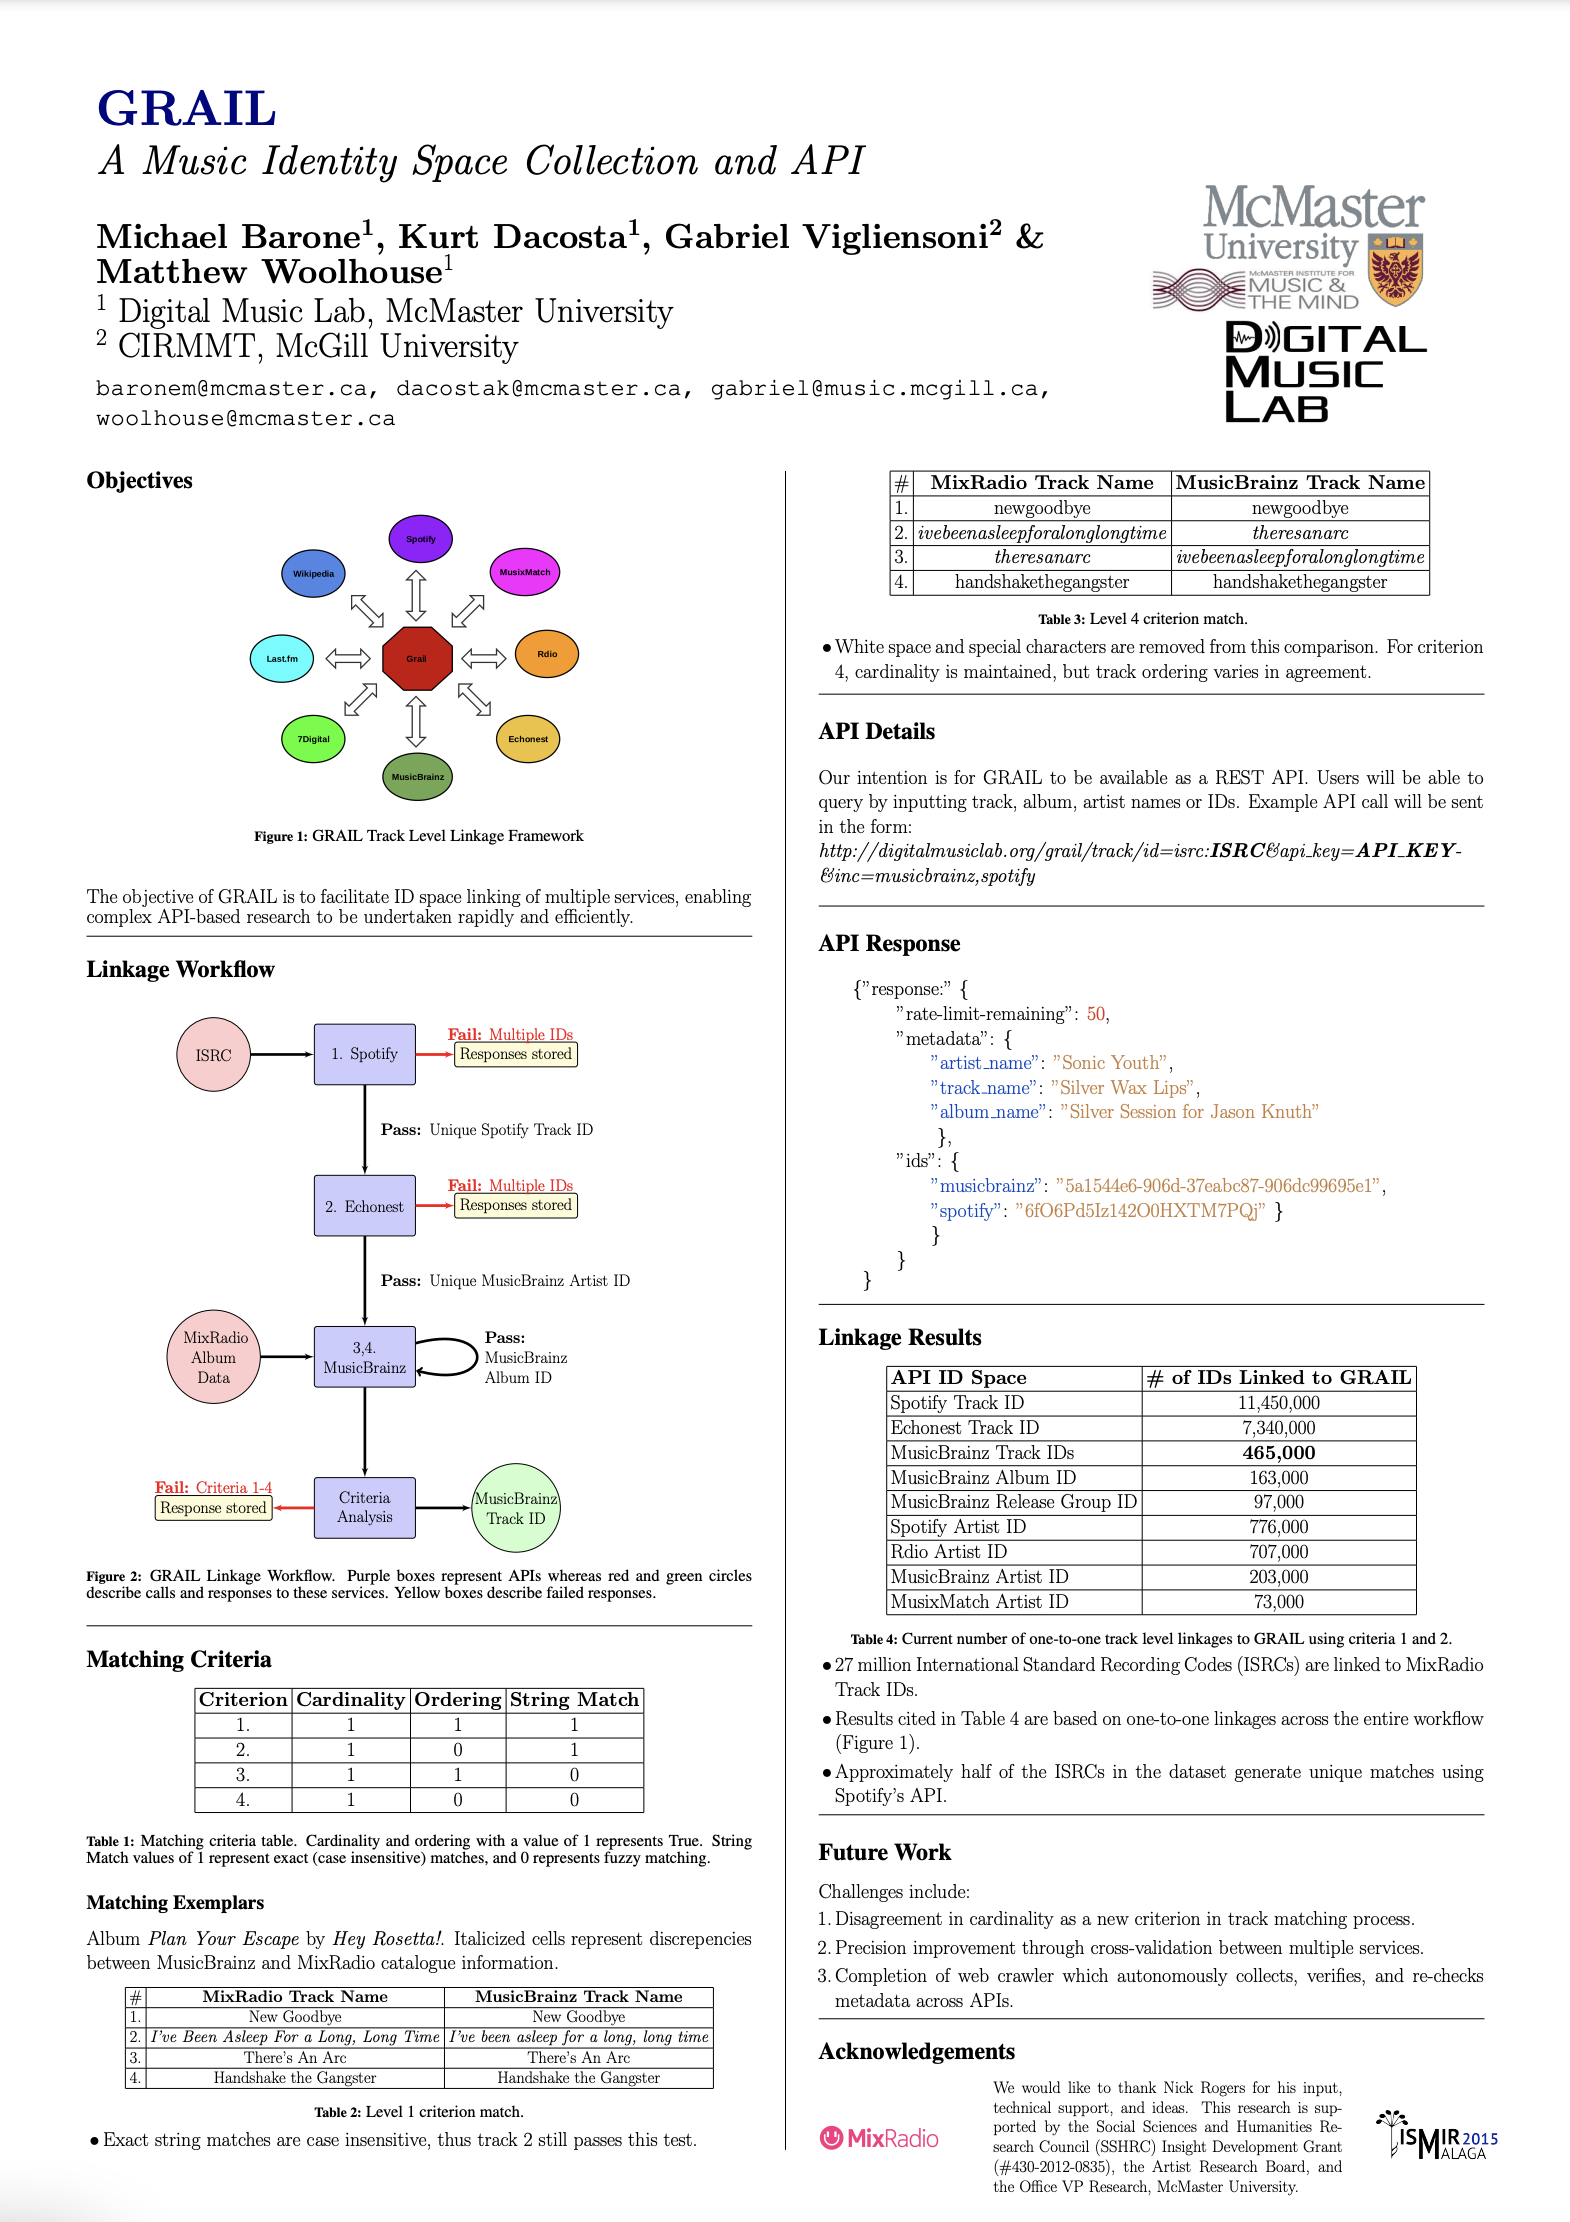 The poster for "GRAIL: A music metadata identity API" by Barone, M. et al. 